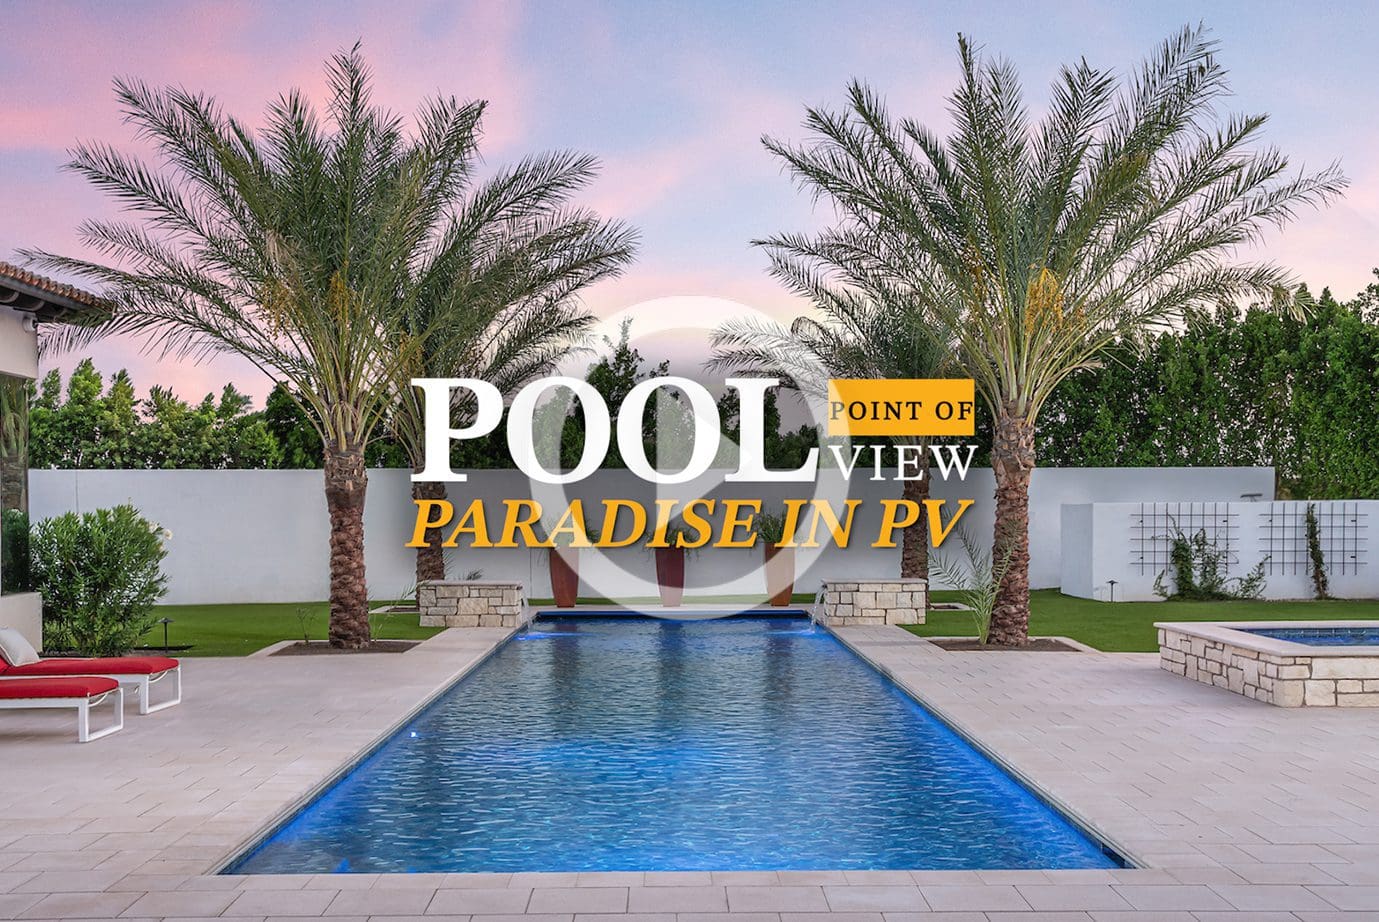 Pool Point Of View – Paradise In PV